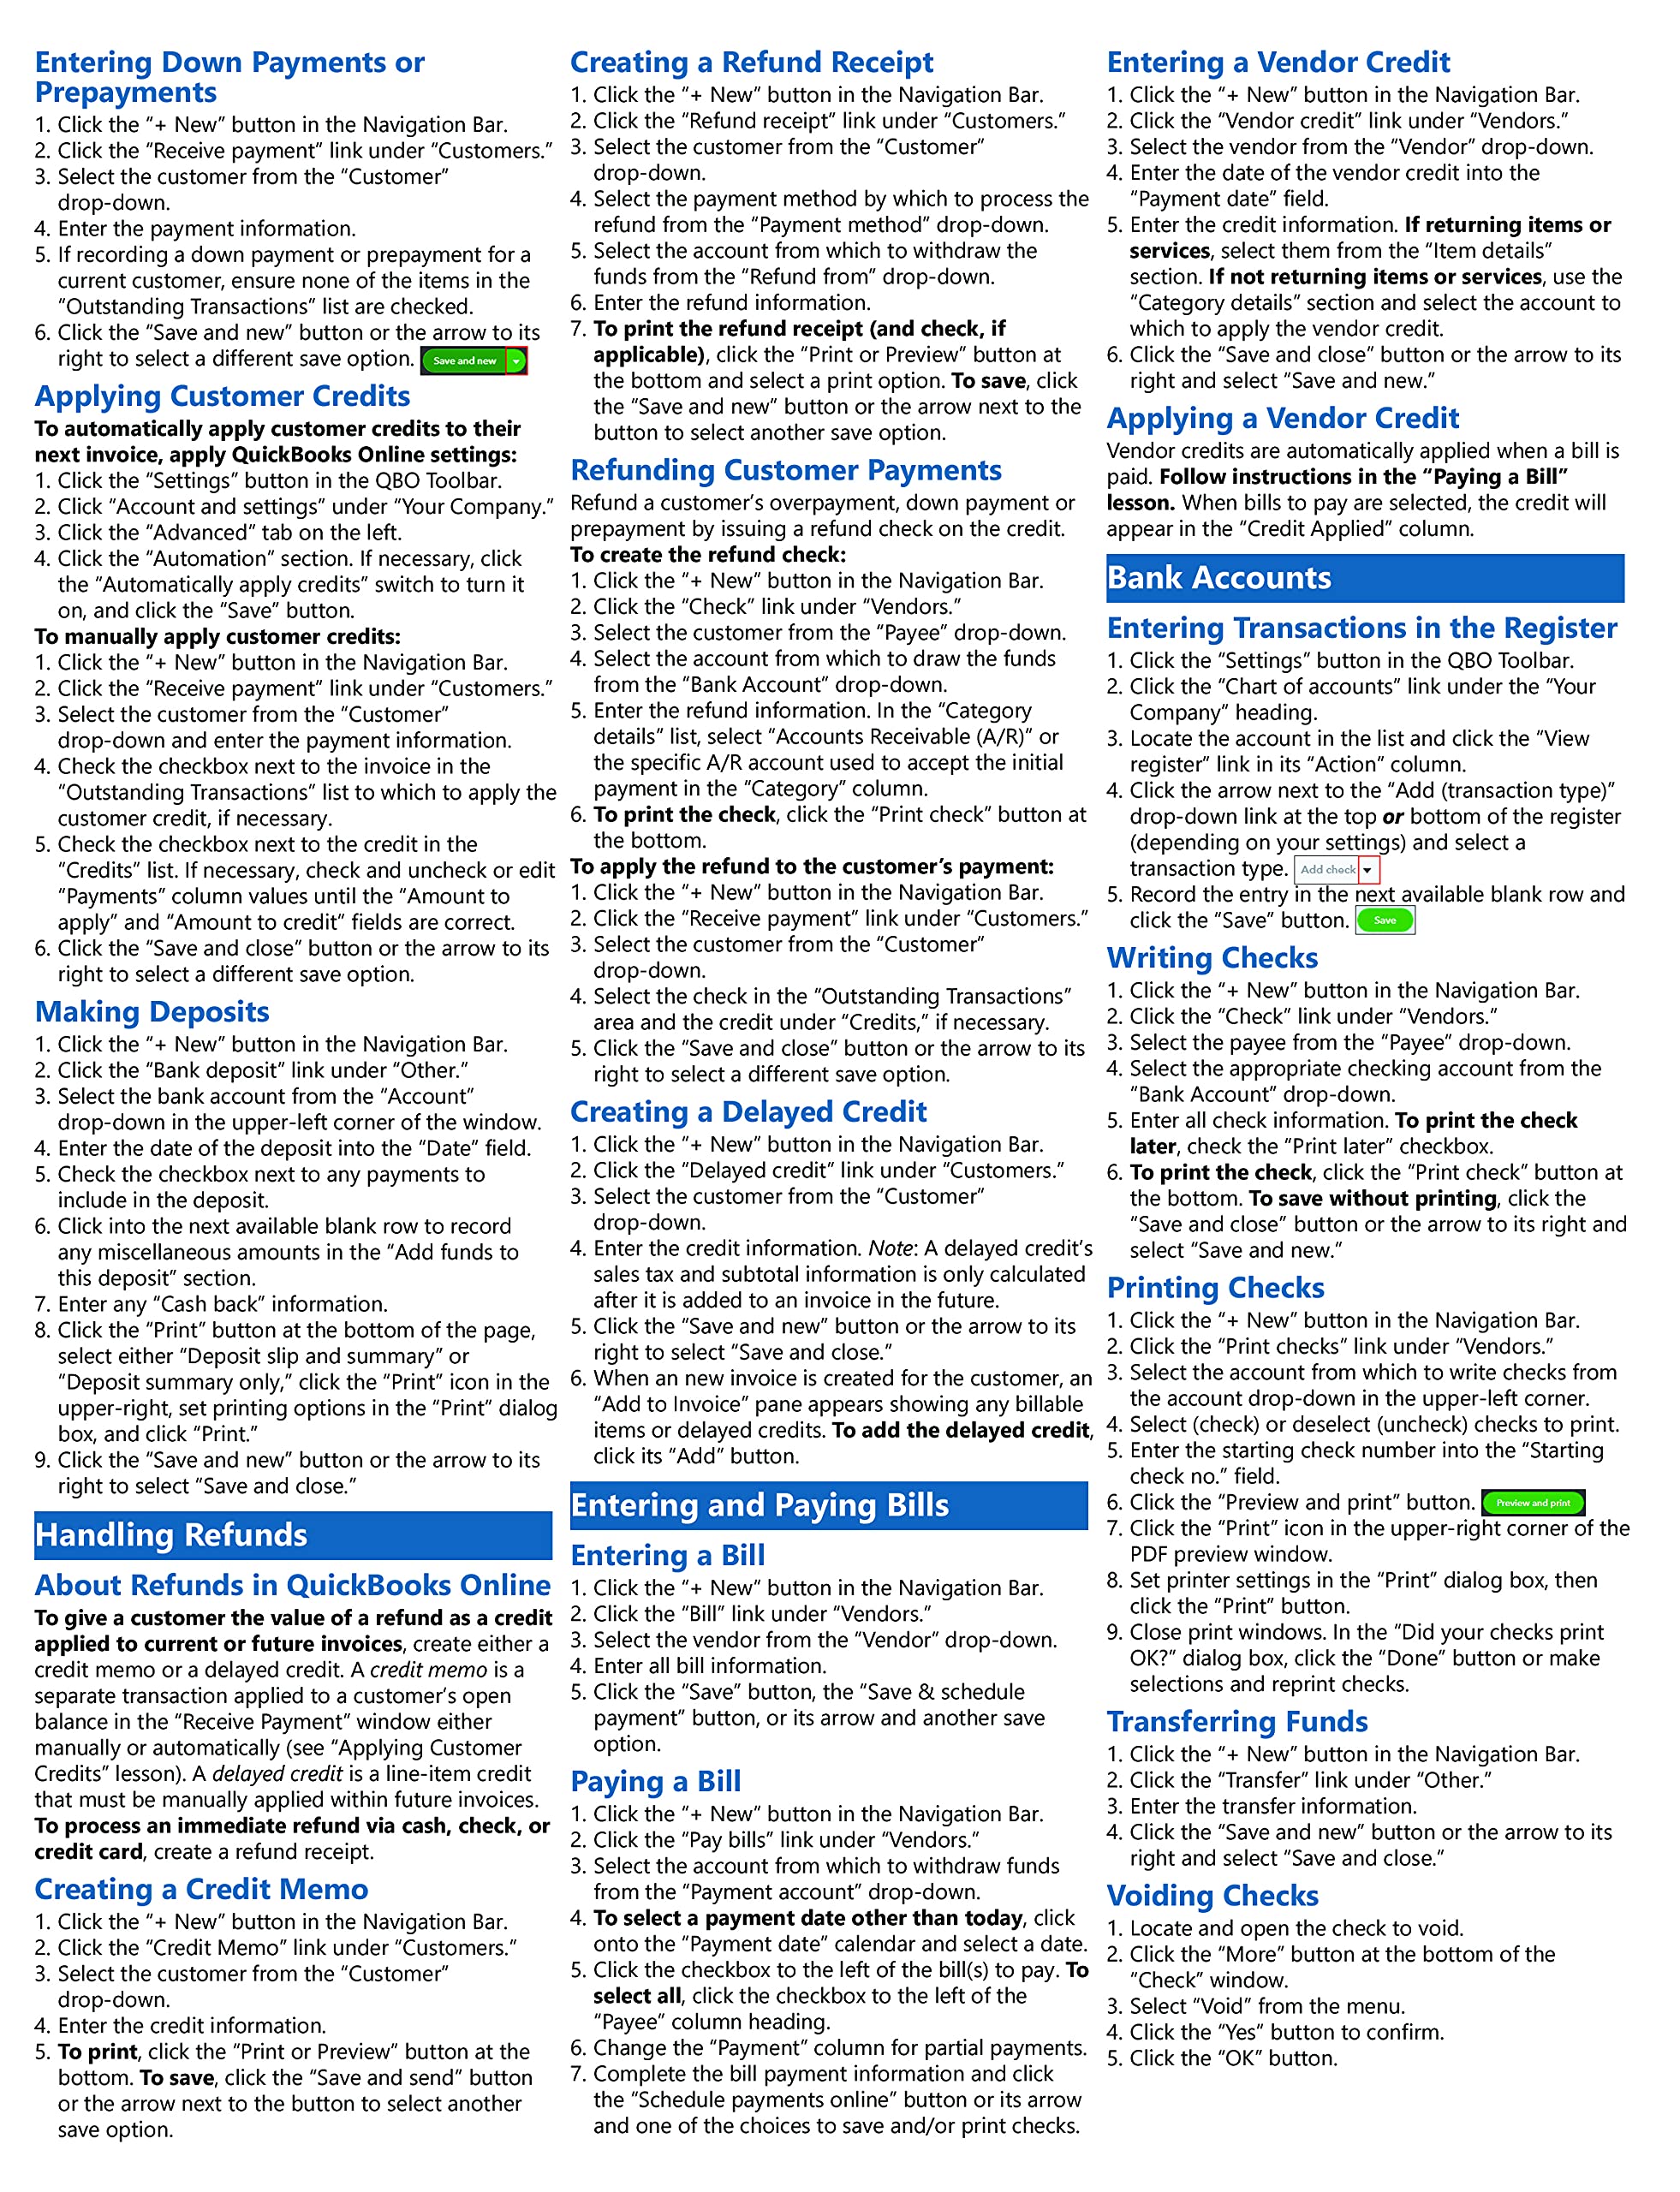 Mua Quickbooks Online Quick Reference Training Card Laminated Tutorial Guide Cheat Sheet 3202